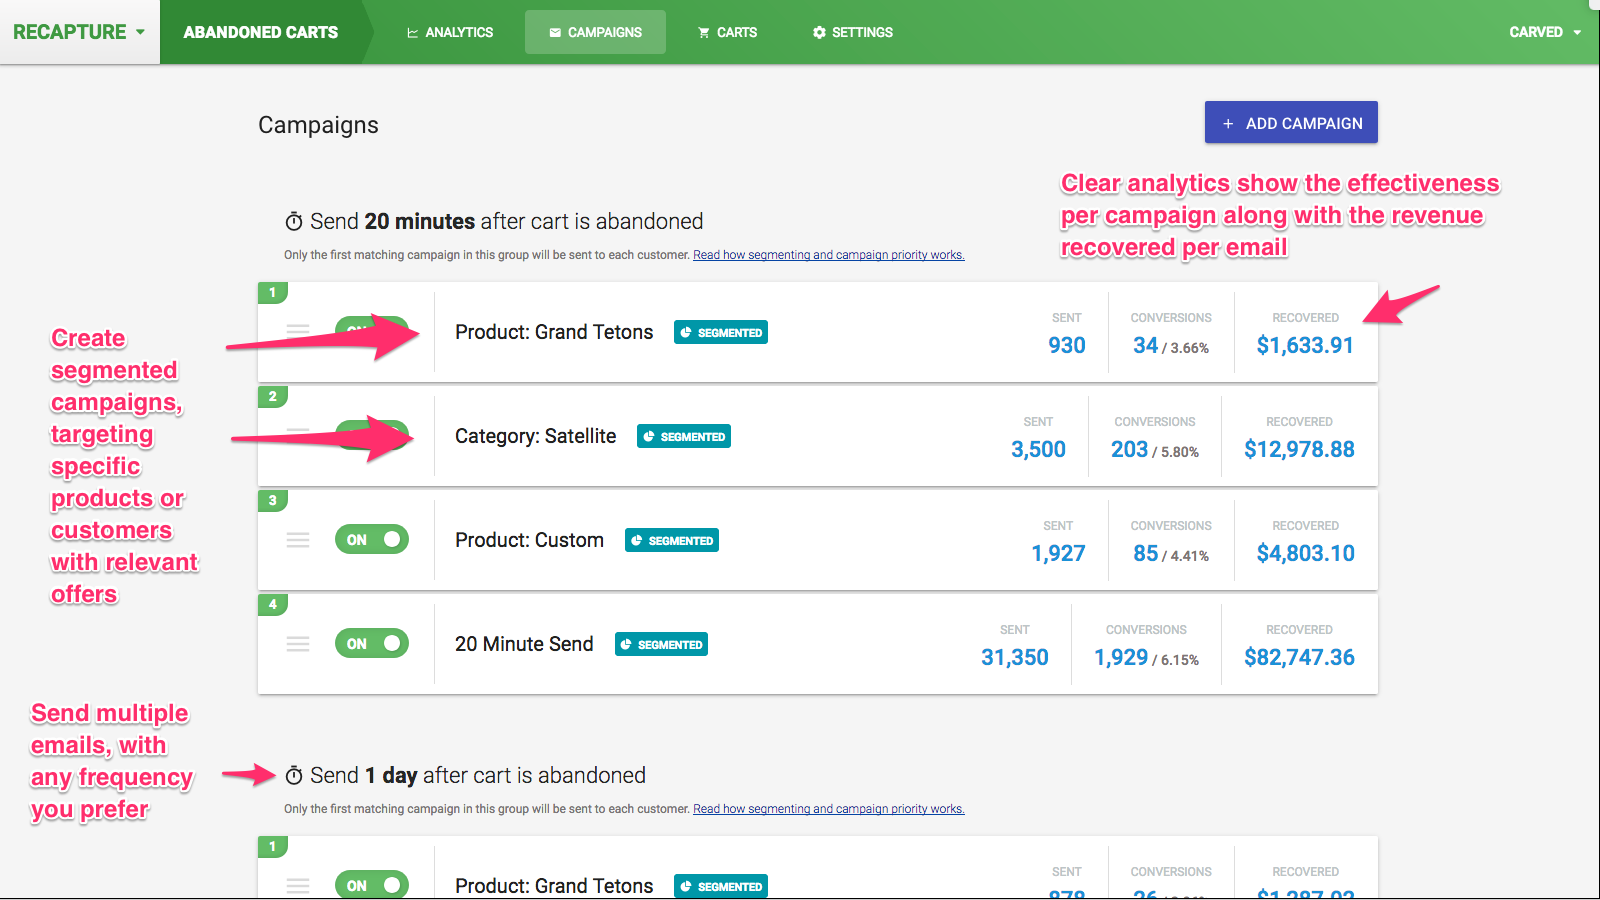 Easy to manage abandoned cart email campaigns with clear ROI